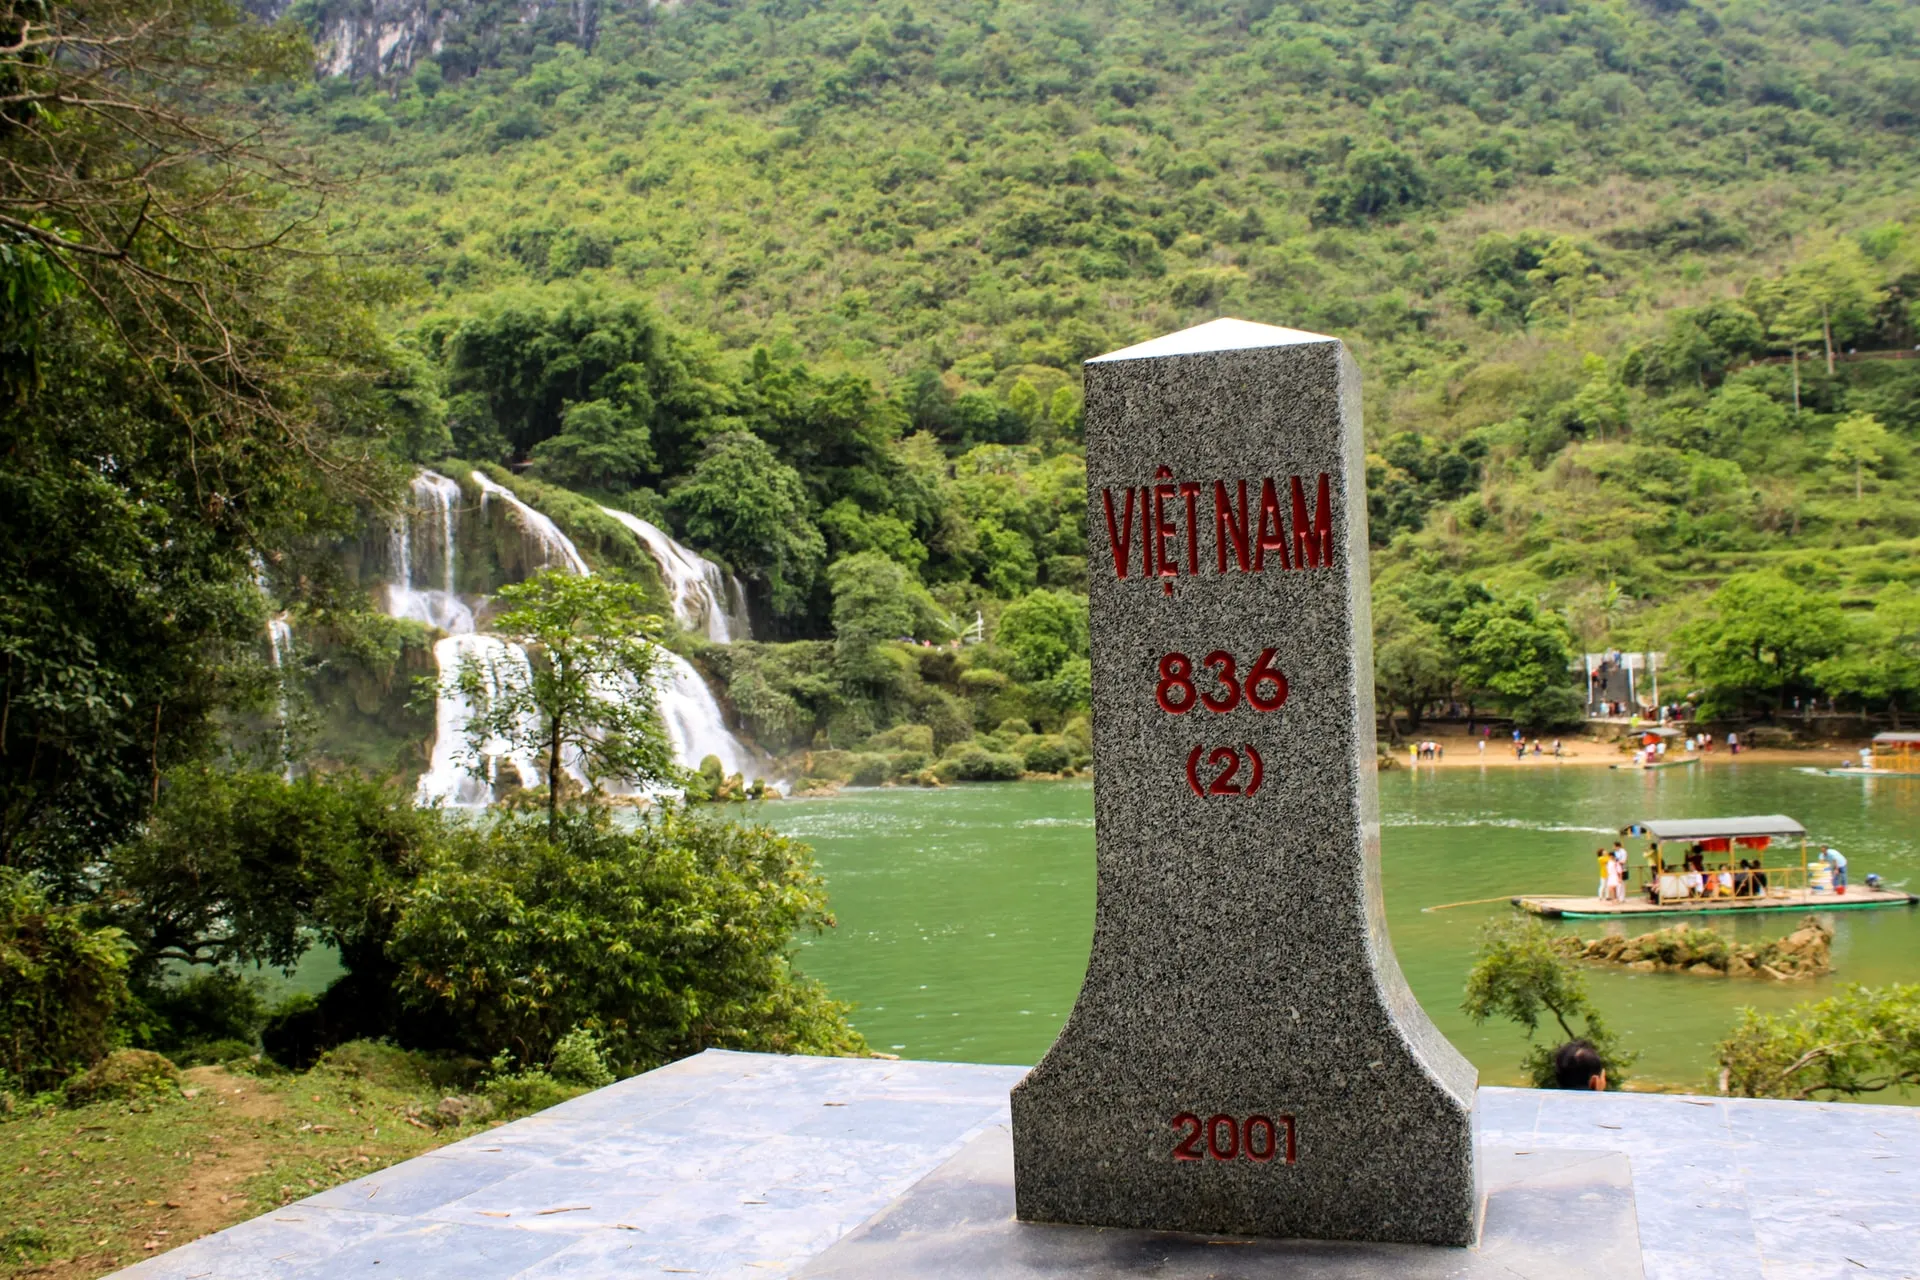 Sotne marking the border between China and Vietnam in Ban Gioc Falls